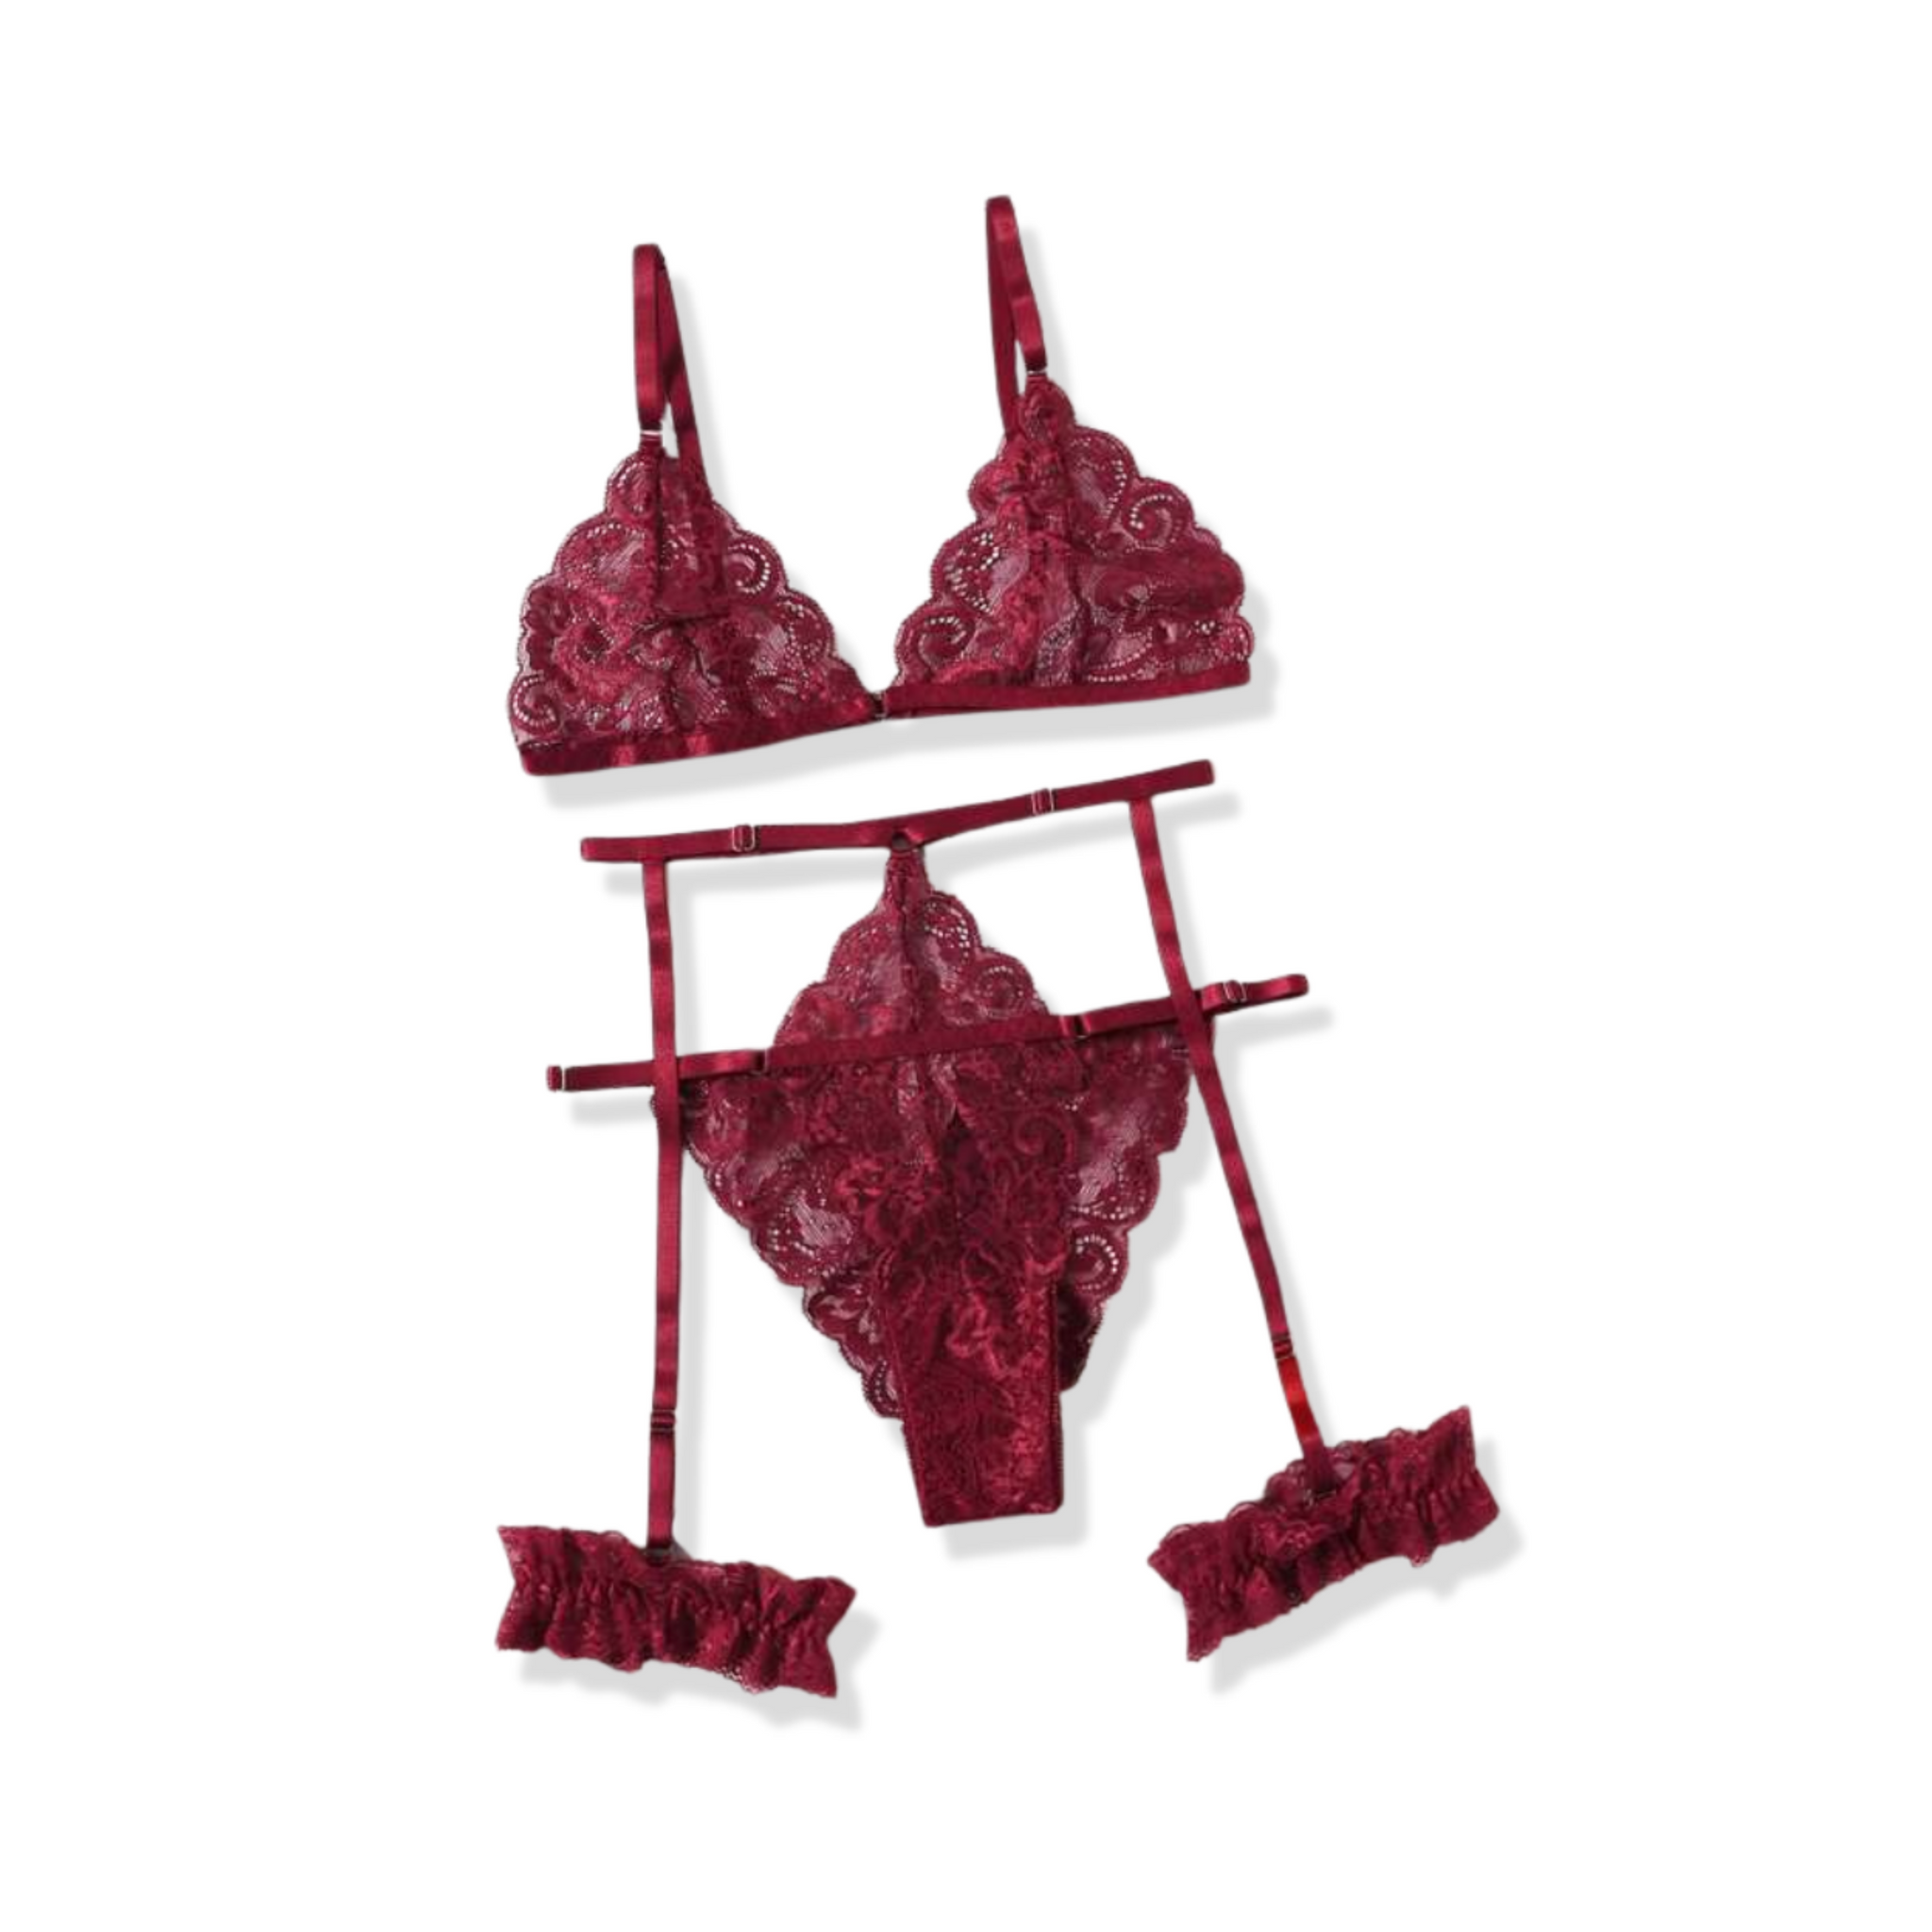 Serena Red Lace Panty Set (Limited Edition) – Fluxe Designs